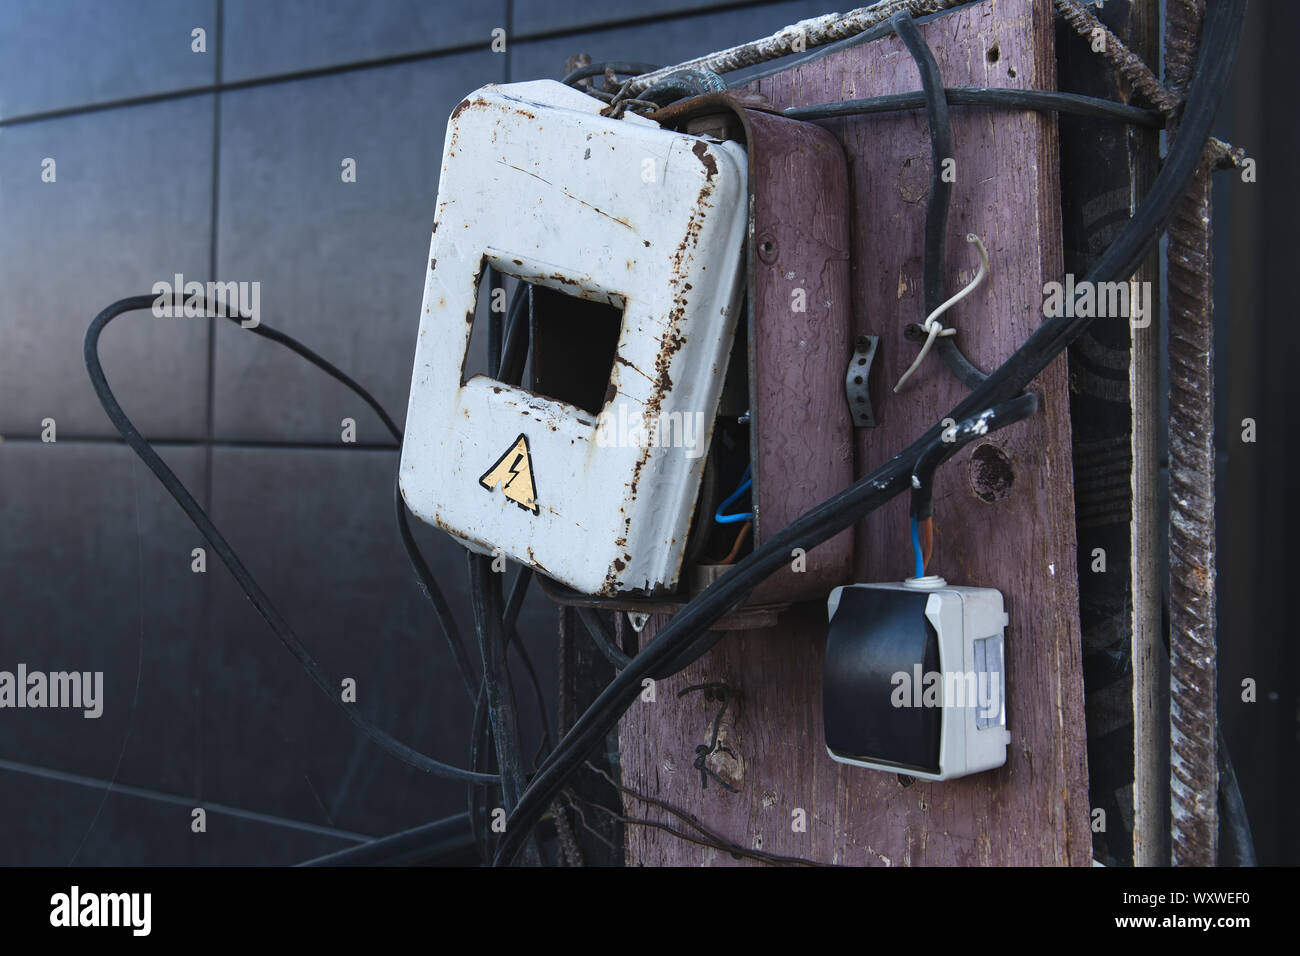 Self made rusty electric box. Energized electrical equipment. Dangerous, high voltage! Stock Photo